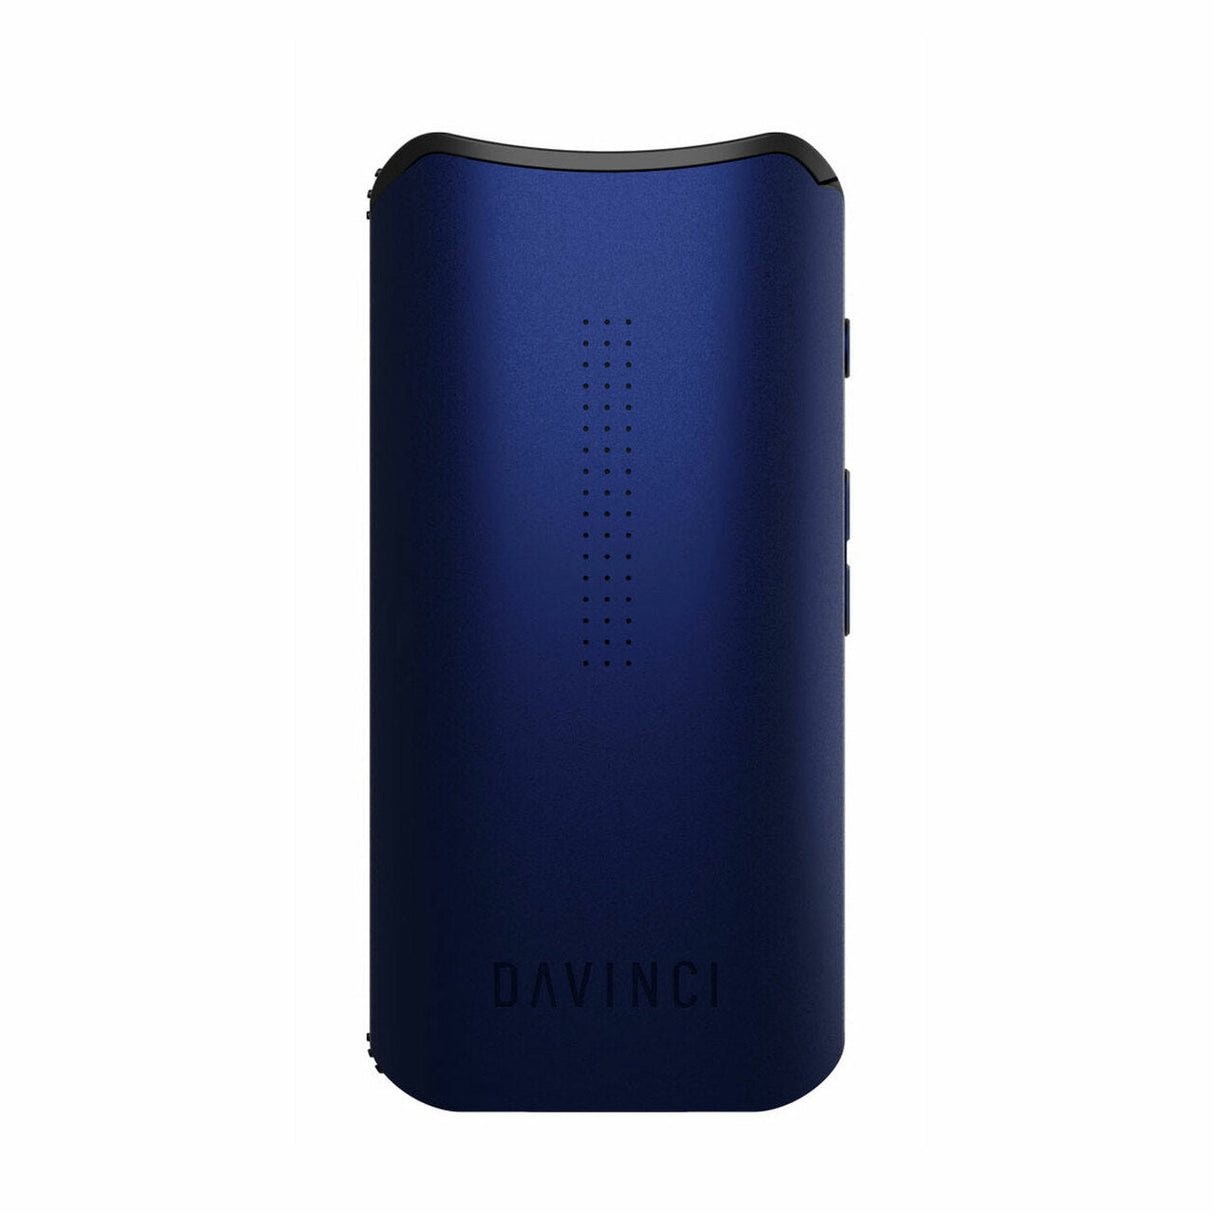 DaVinci IQC Vaporizer in Blue - Front View - Portable Design with Battery Power for Dry Herbs and Concentrates